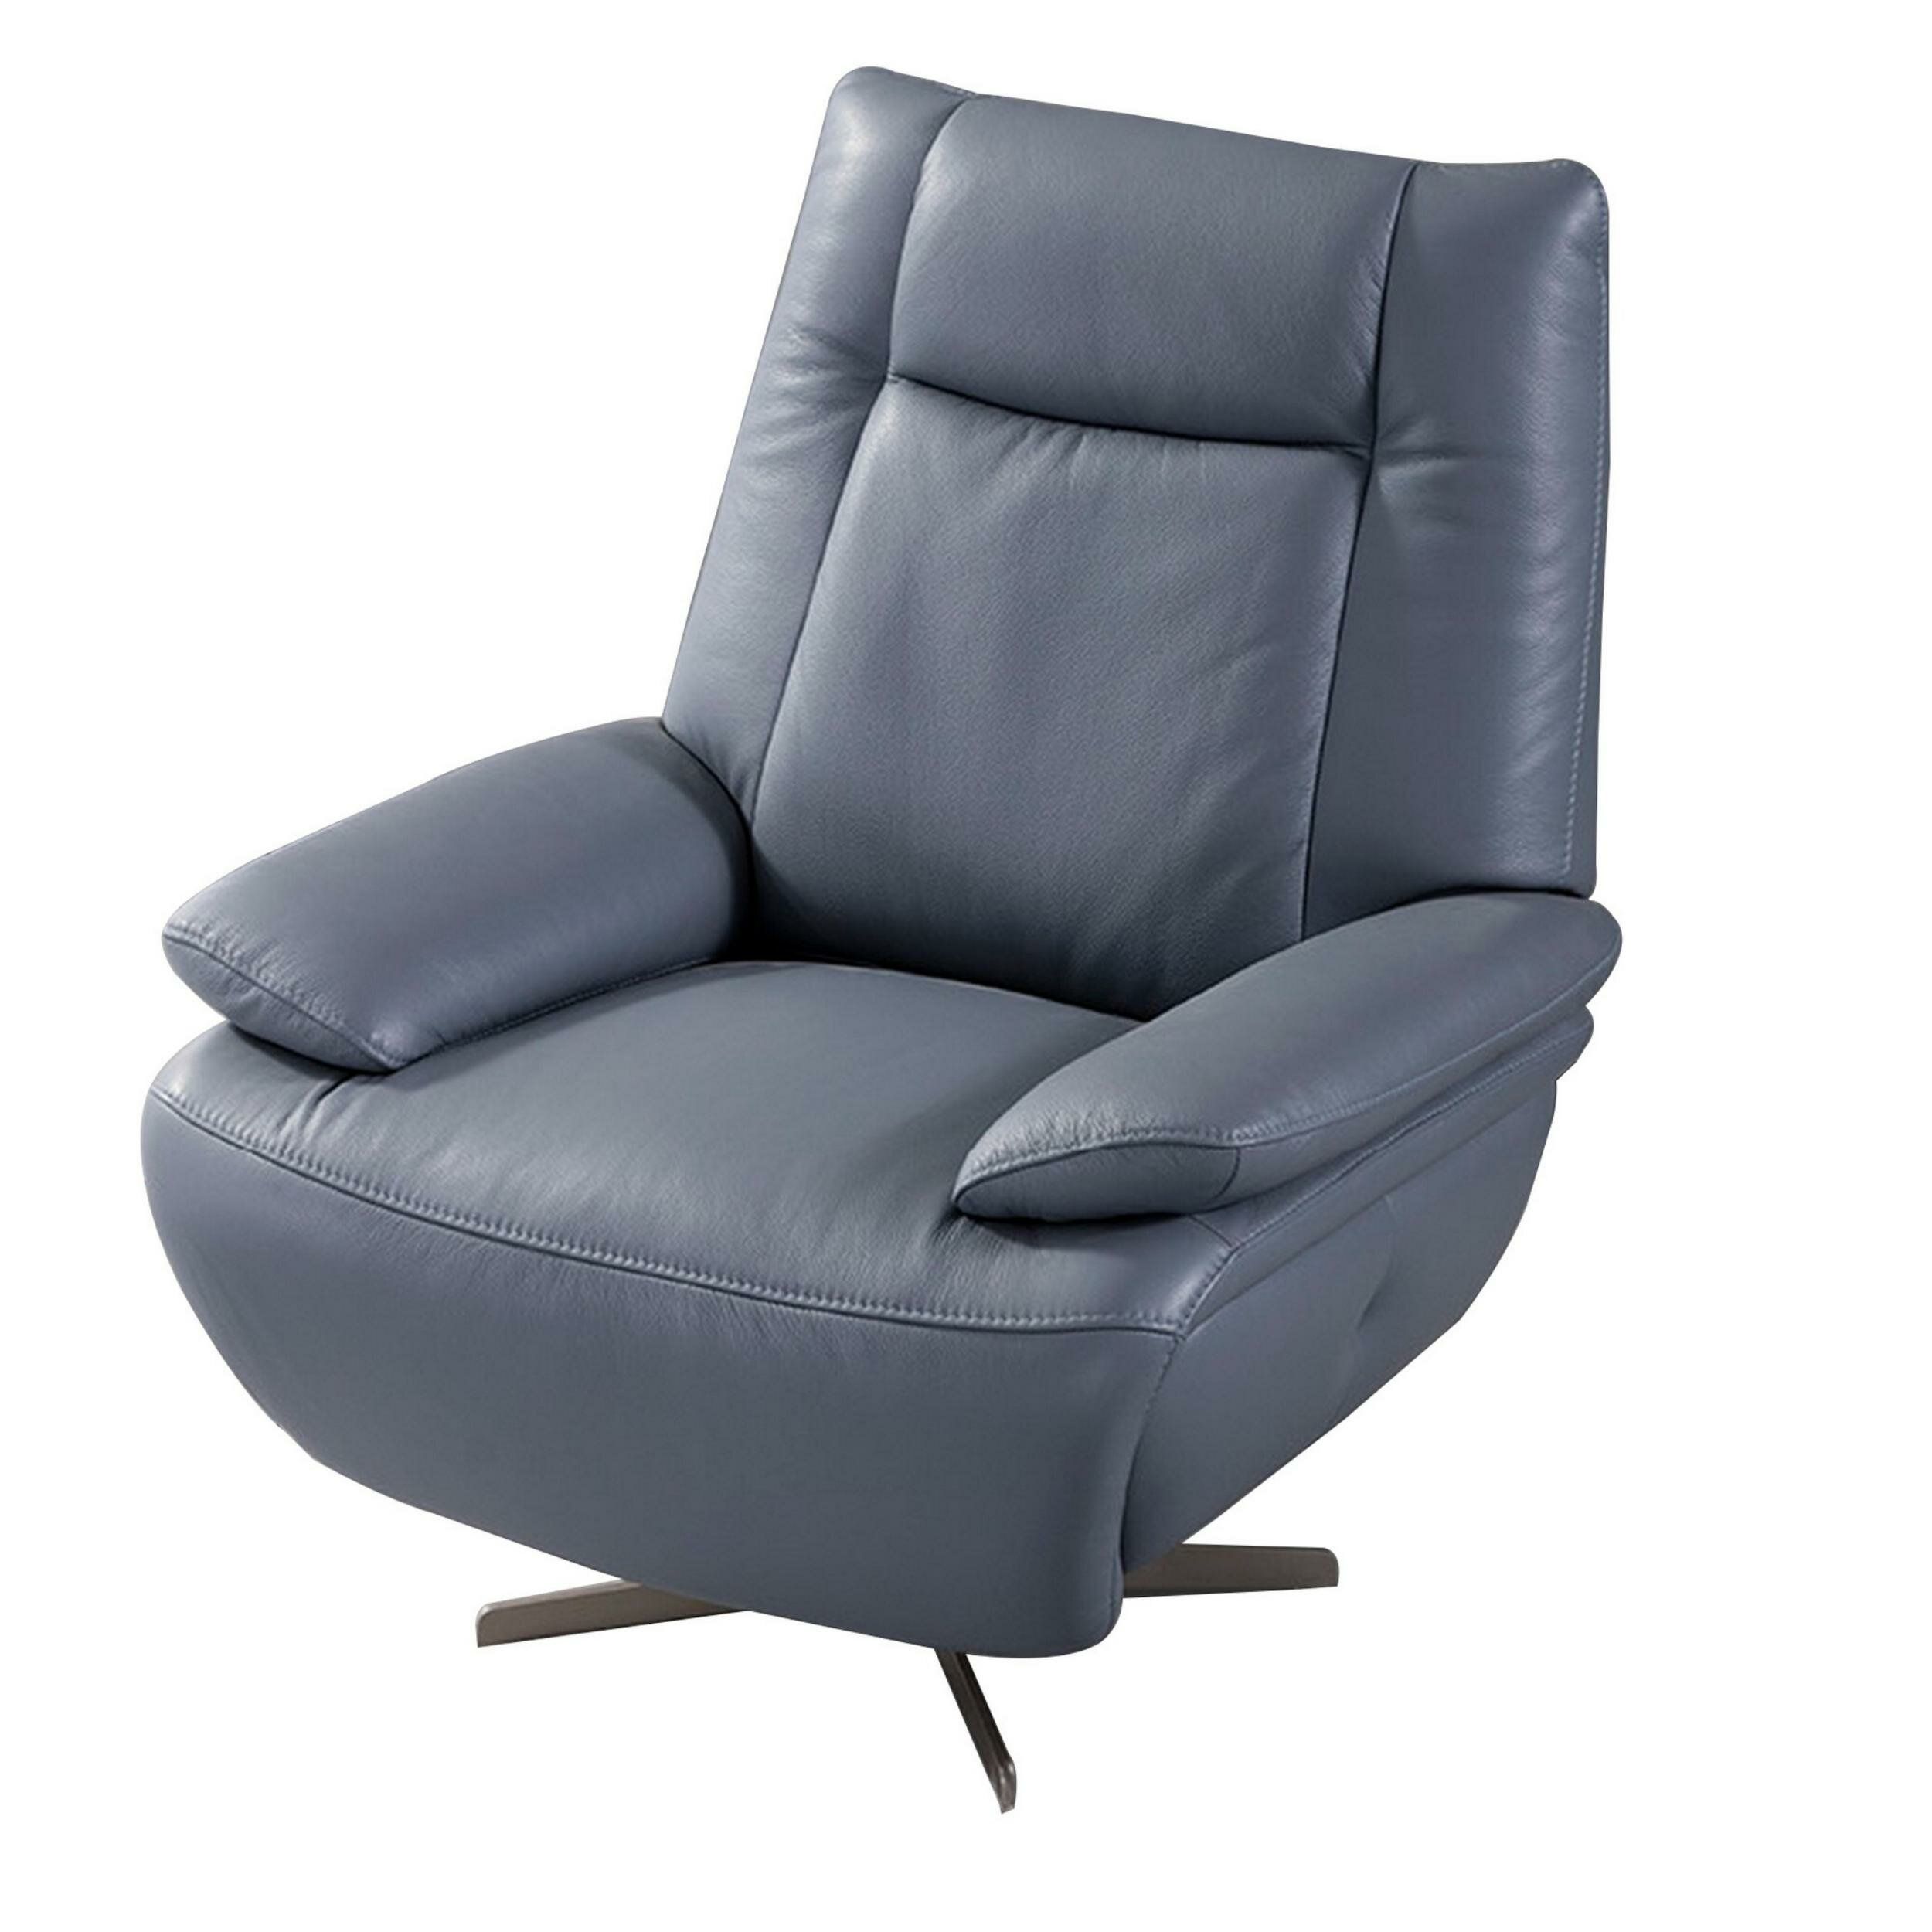 Avy 35" W Faux Leather Armchair Intended For Jarin Faux Leather Armchairs (View 10 of 15)